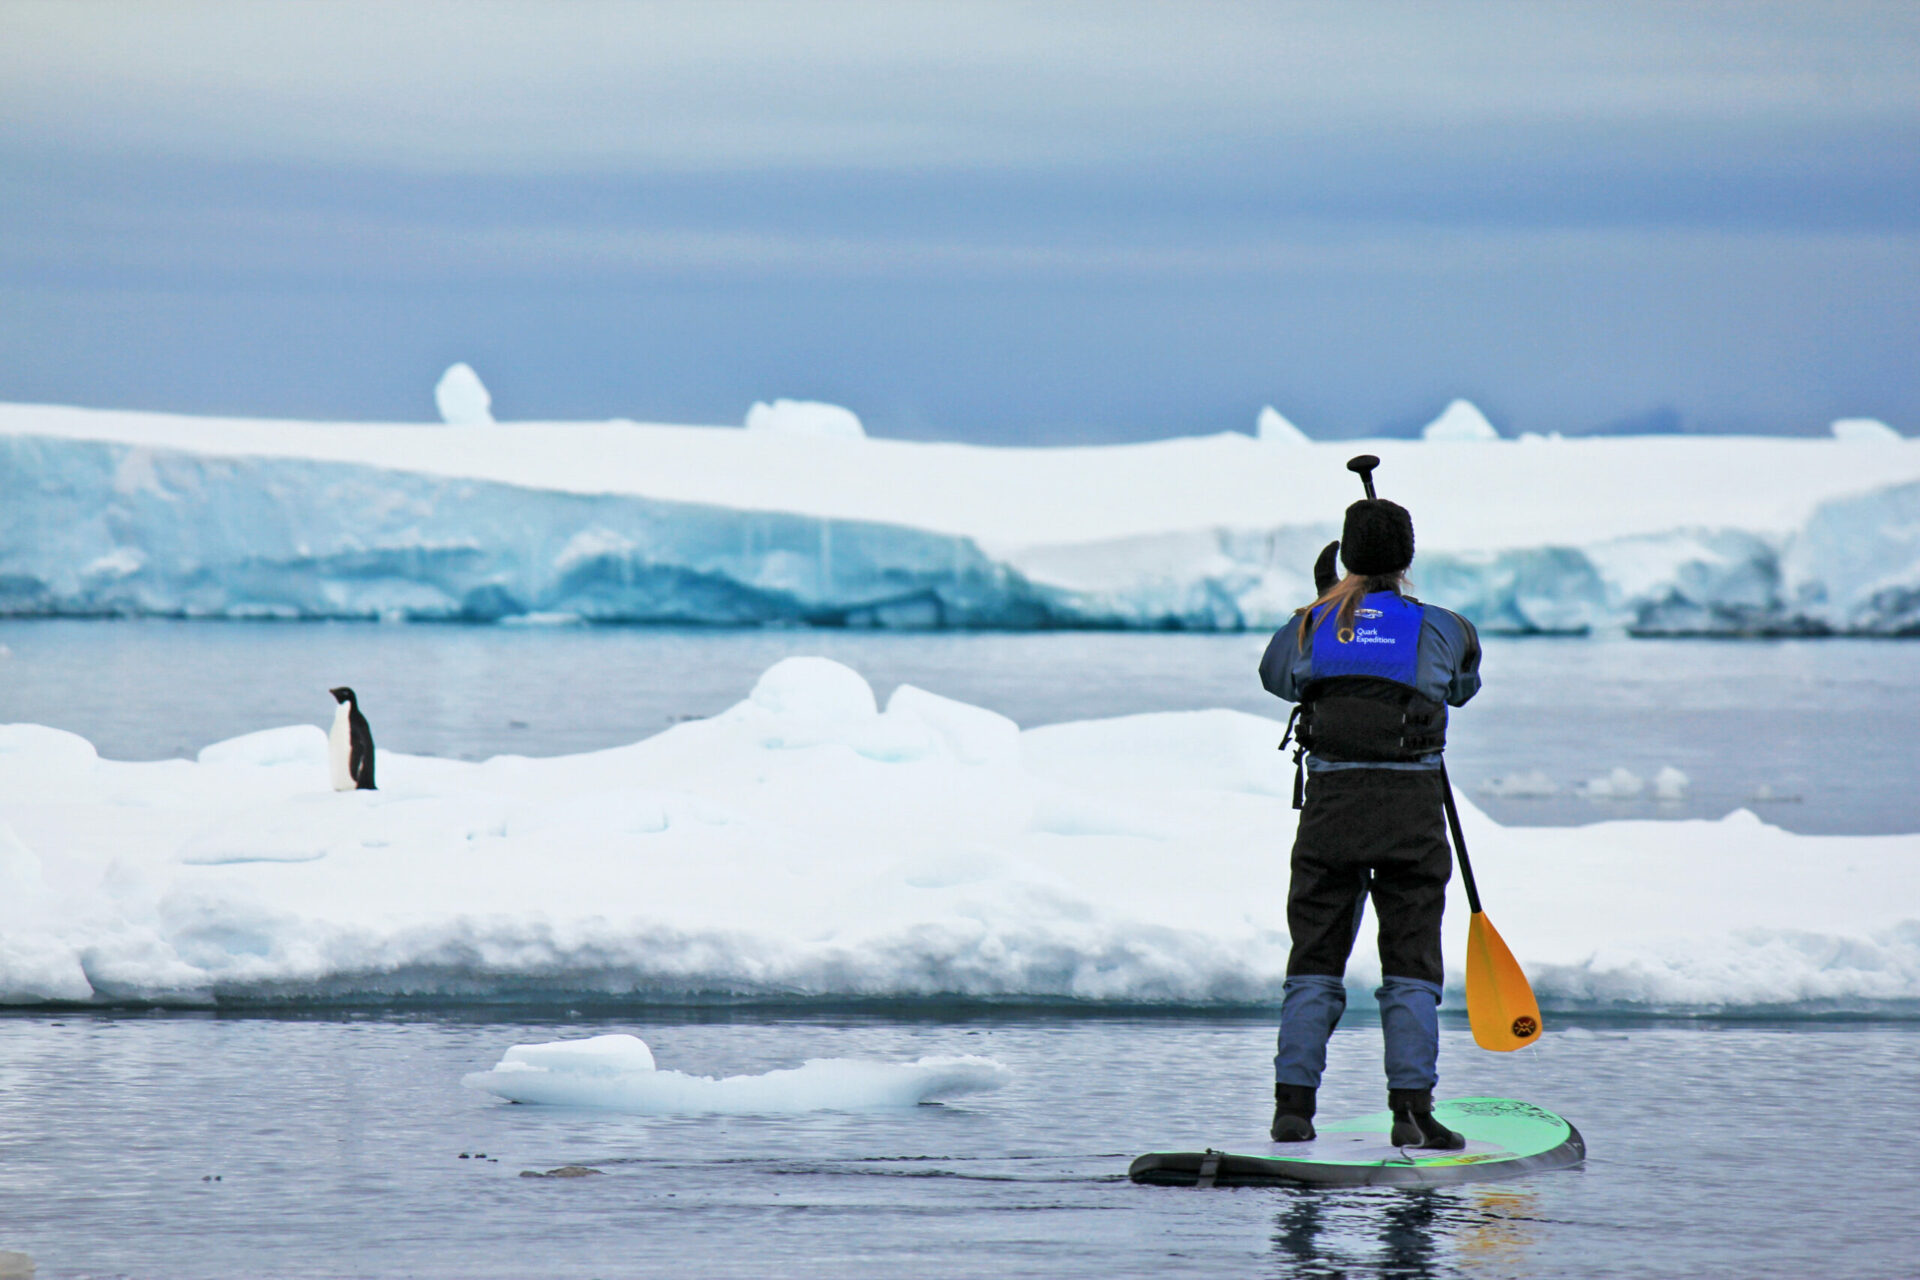 enjoy the adventure activity of stand-up paddleboarding in antarctica with polar holidays